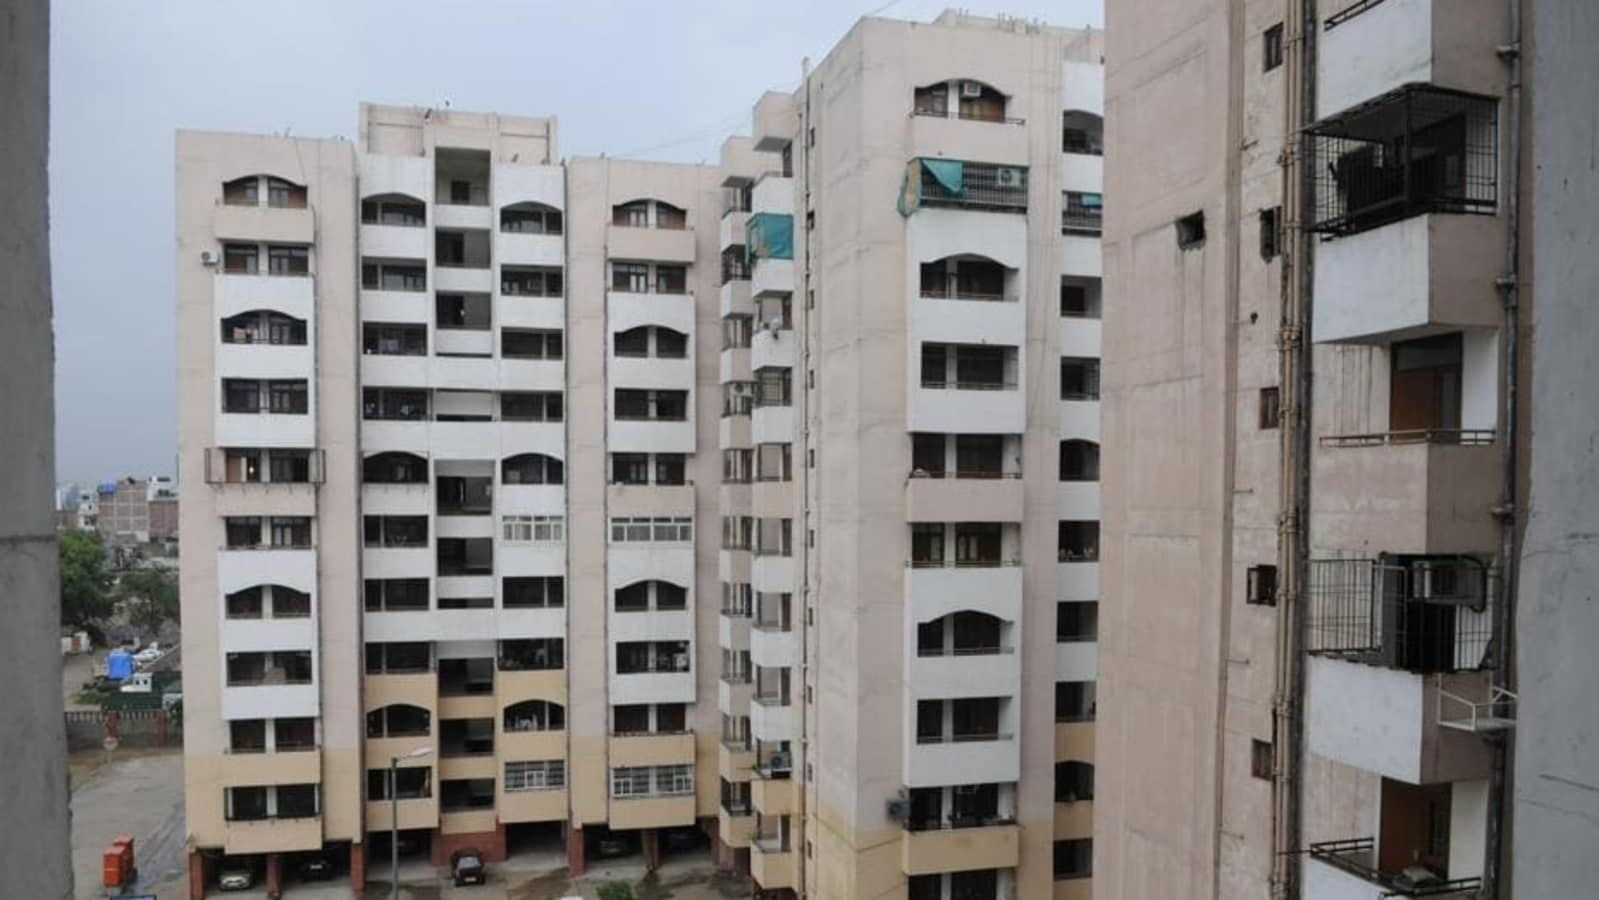 DDA launches special housing scheme. Number of flats, price, location | Latest News Delhi - Hindustan Times